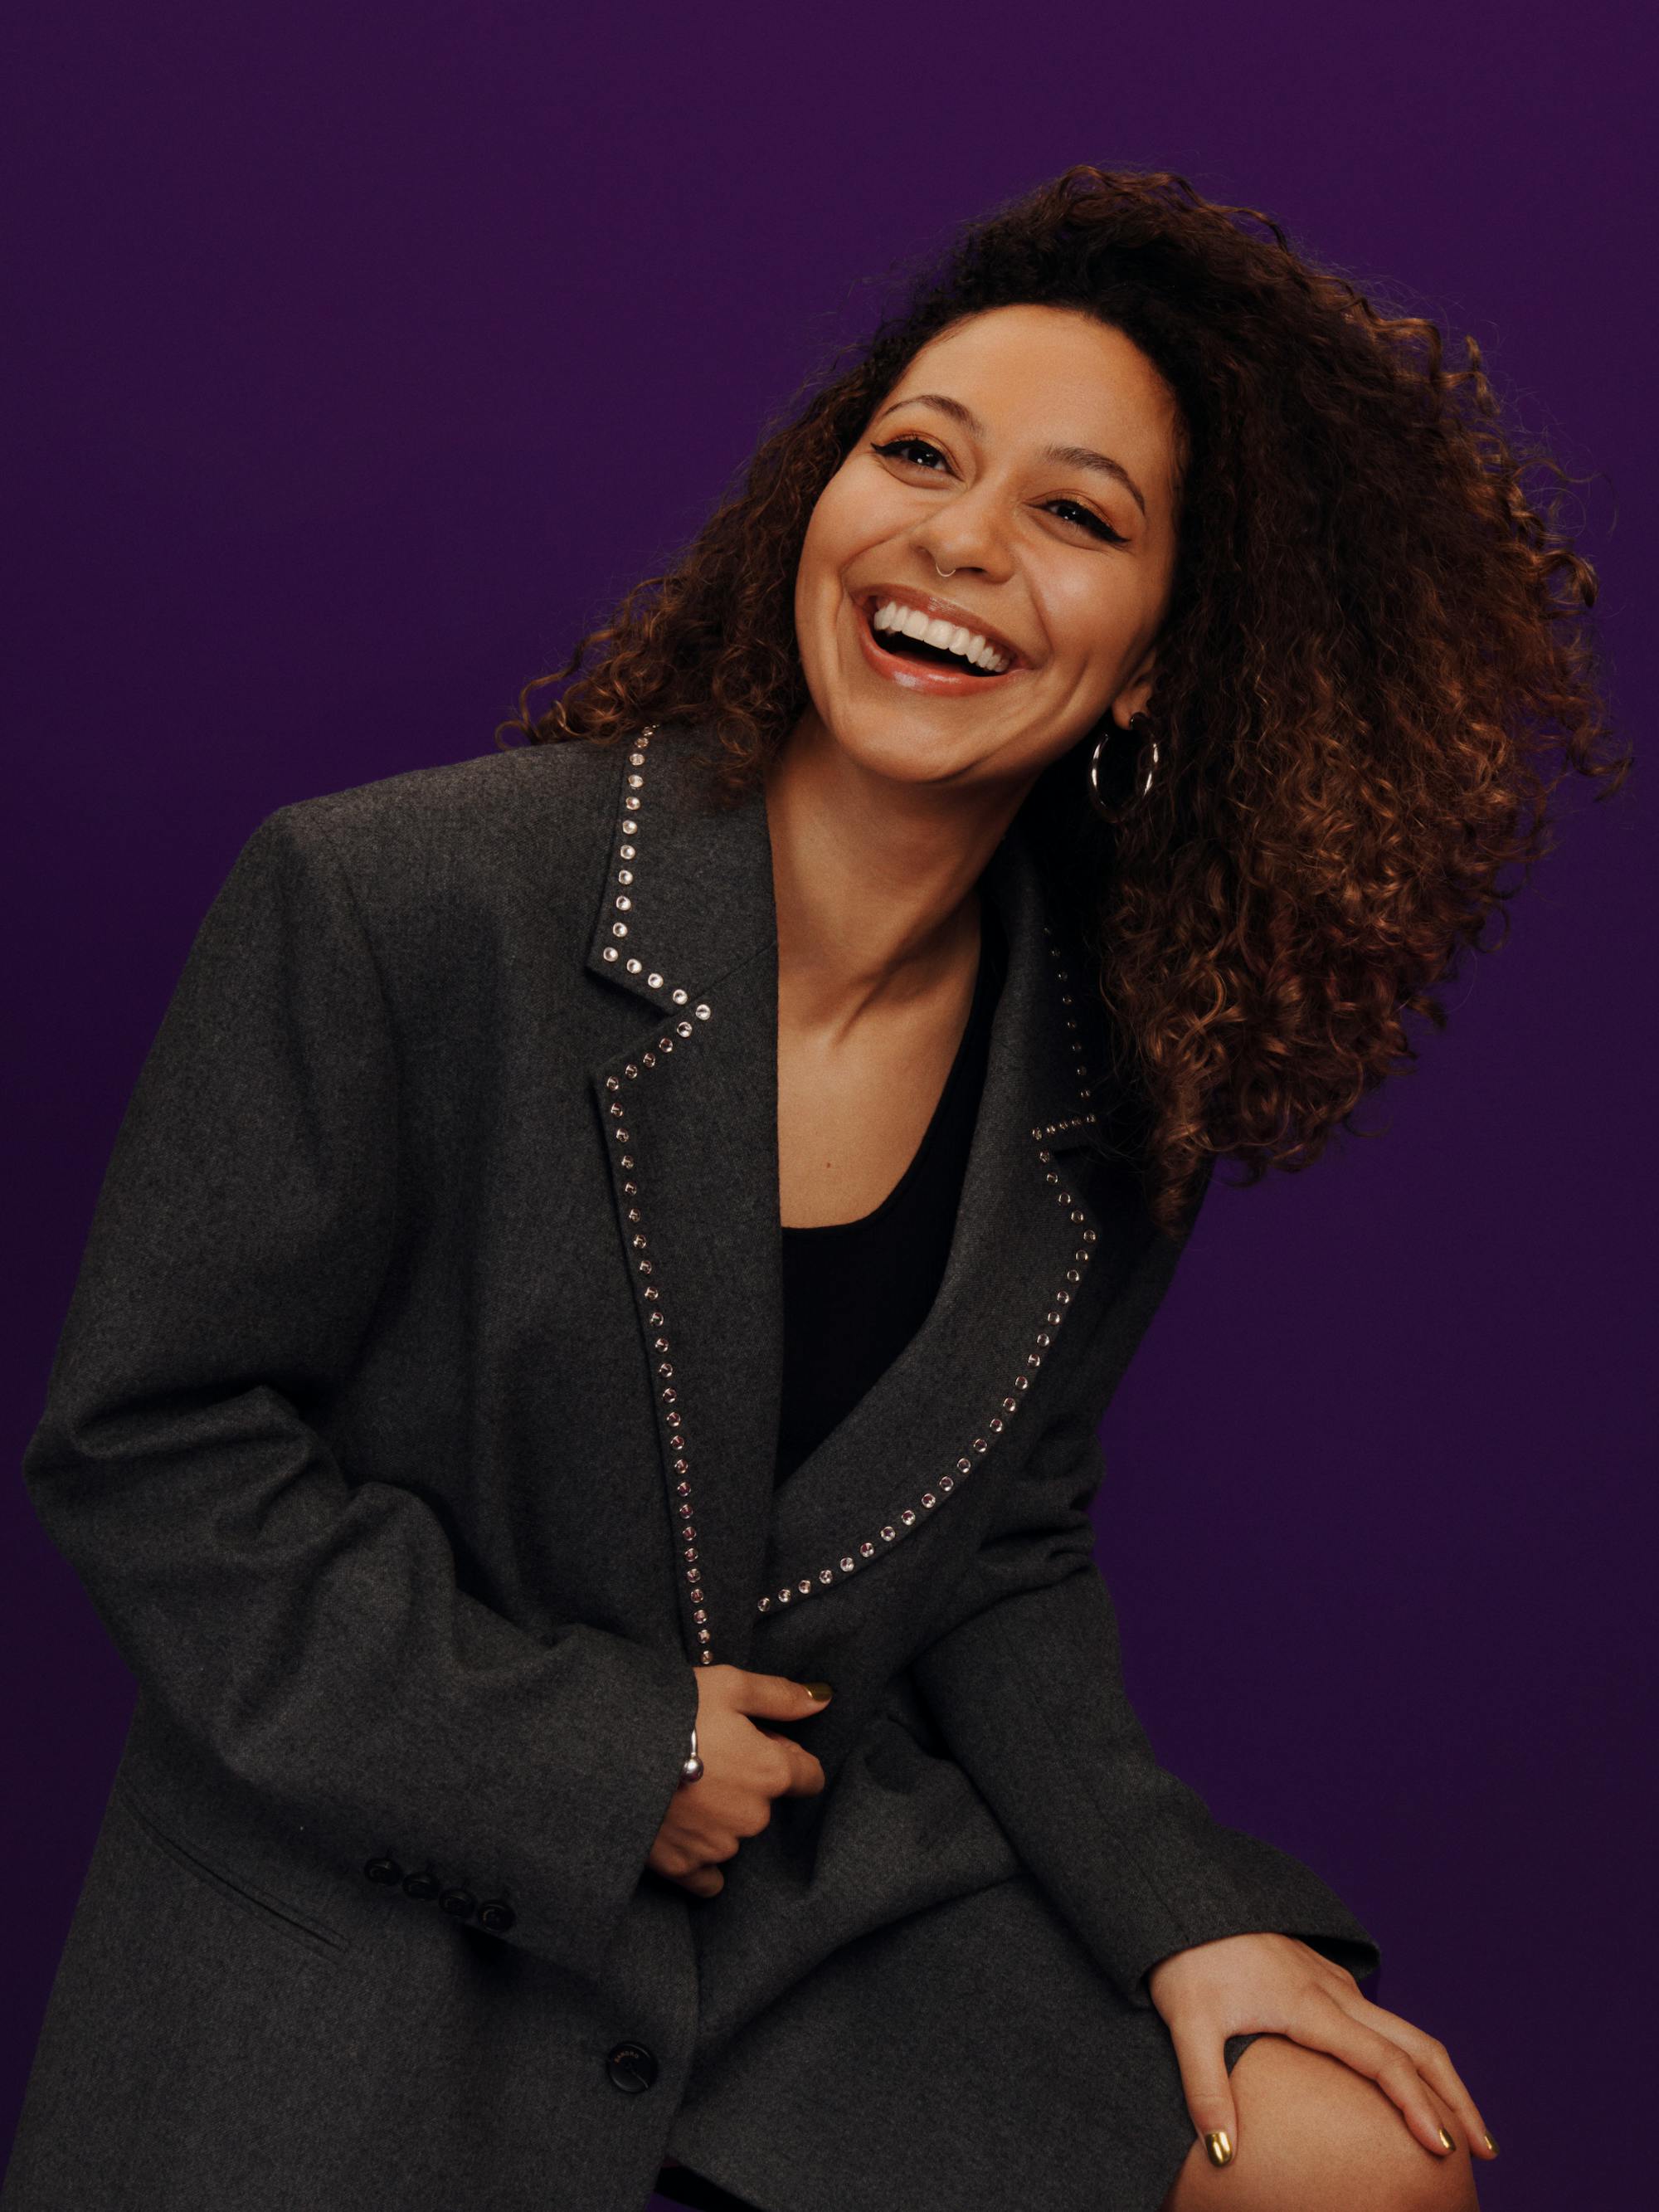 Kassius Nelson wears a black blazer and smiles wide in a purple room. 